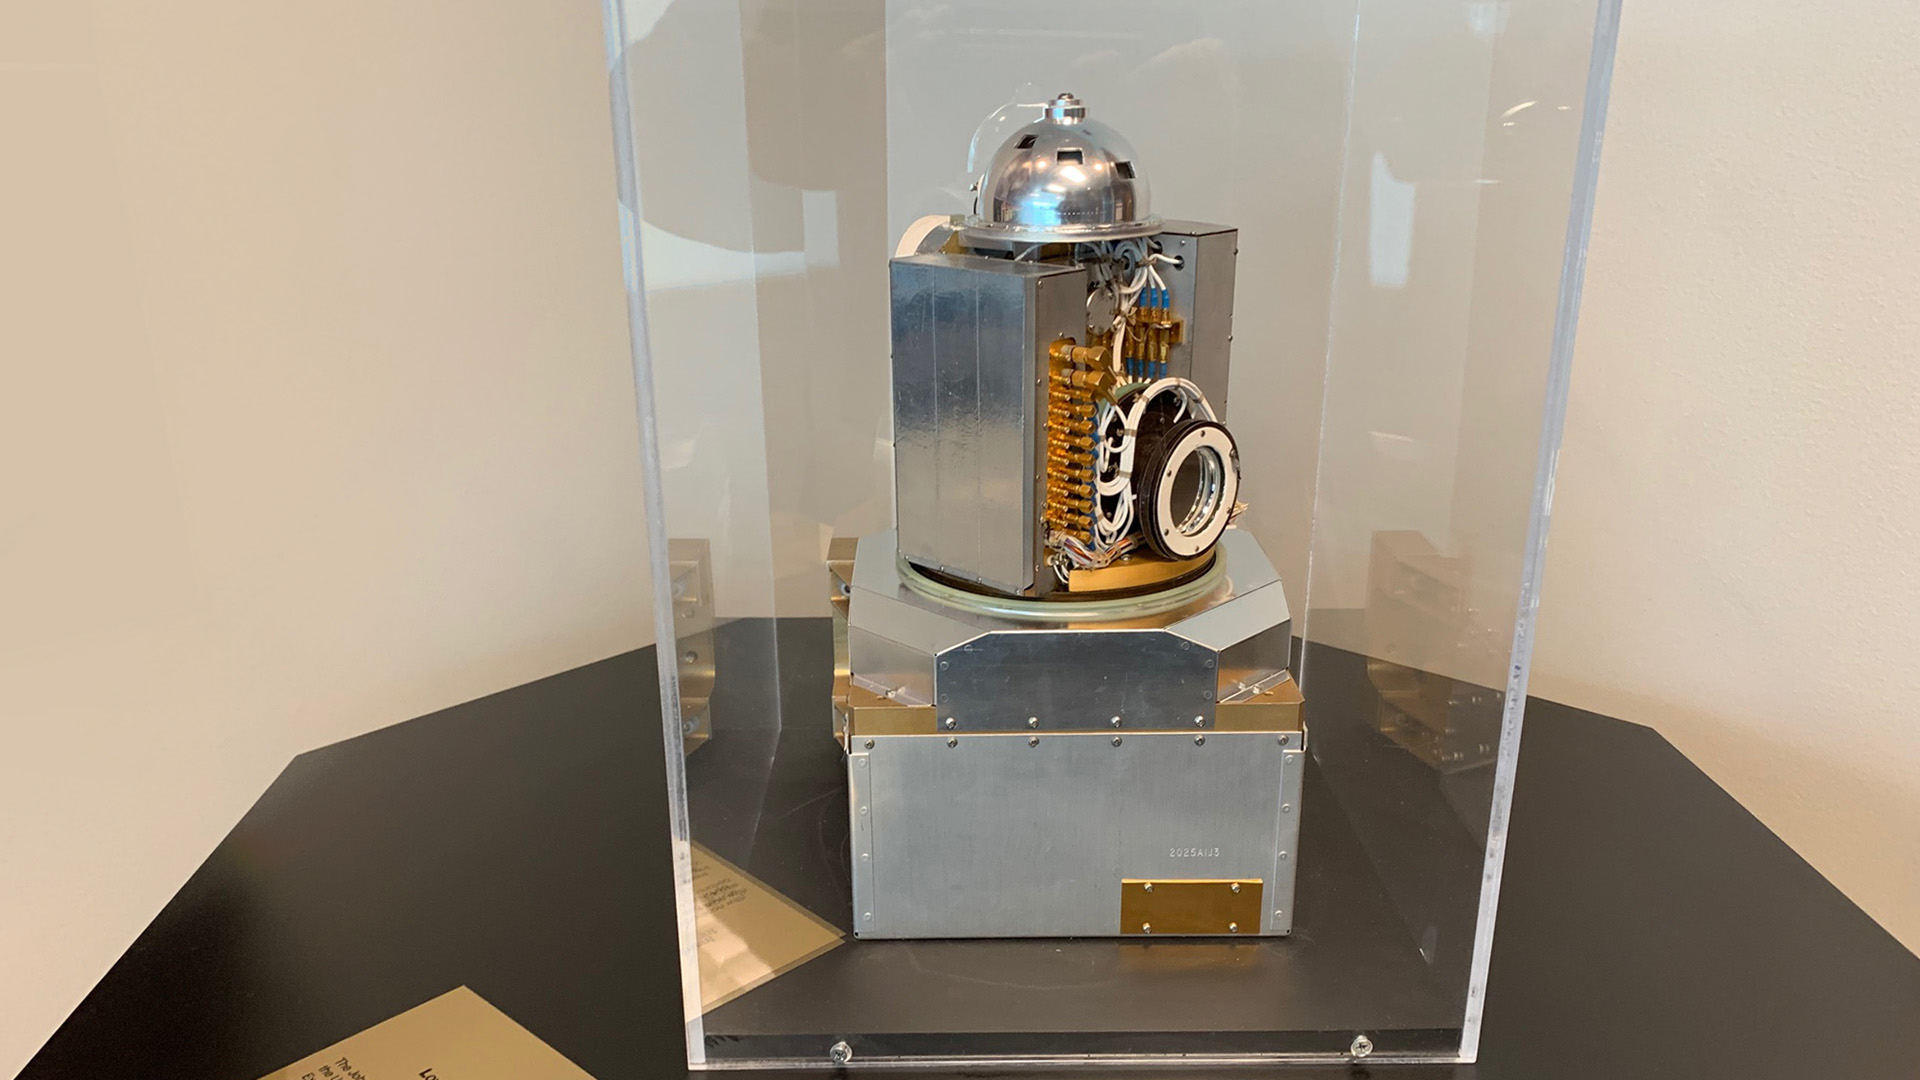 Image of the Low Energy Charged Particle (LECP) instrument, built by APL for the NASA Voyager missions.